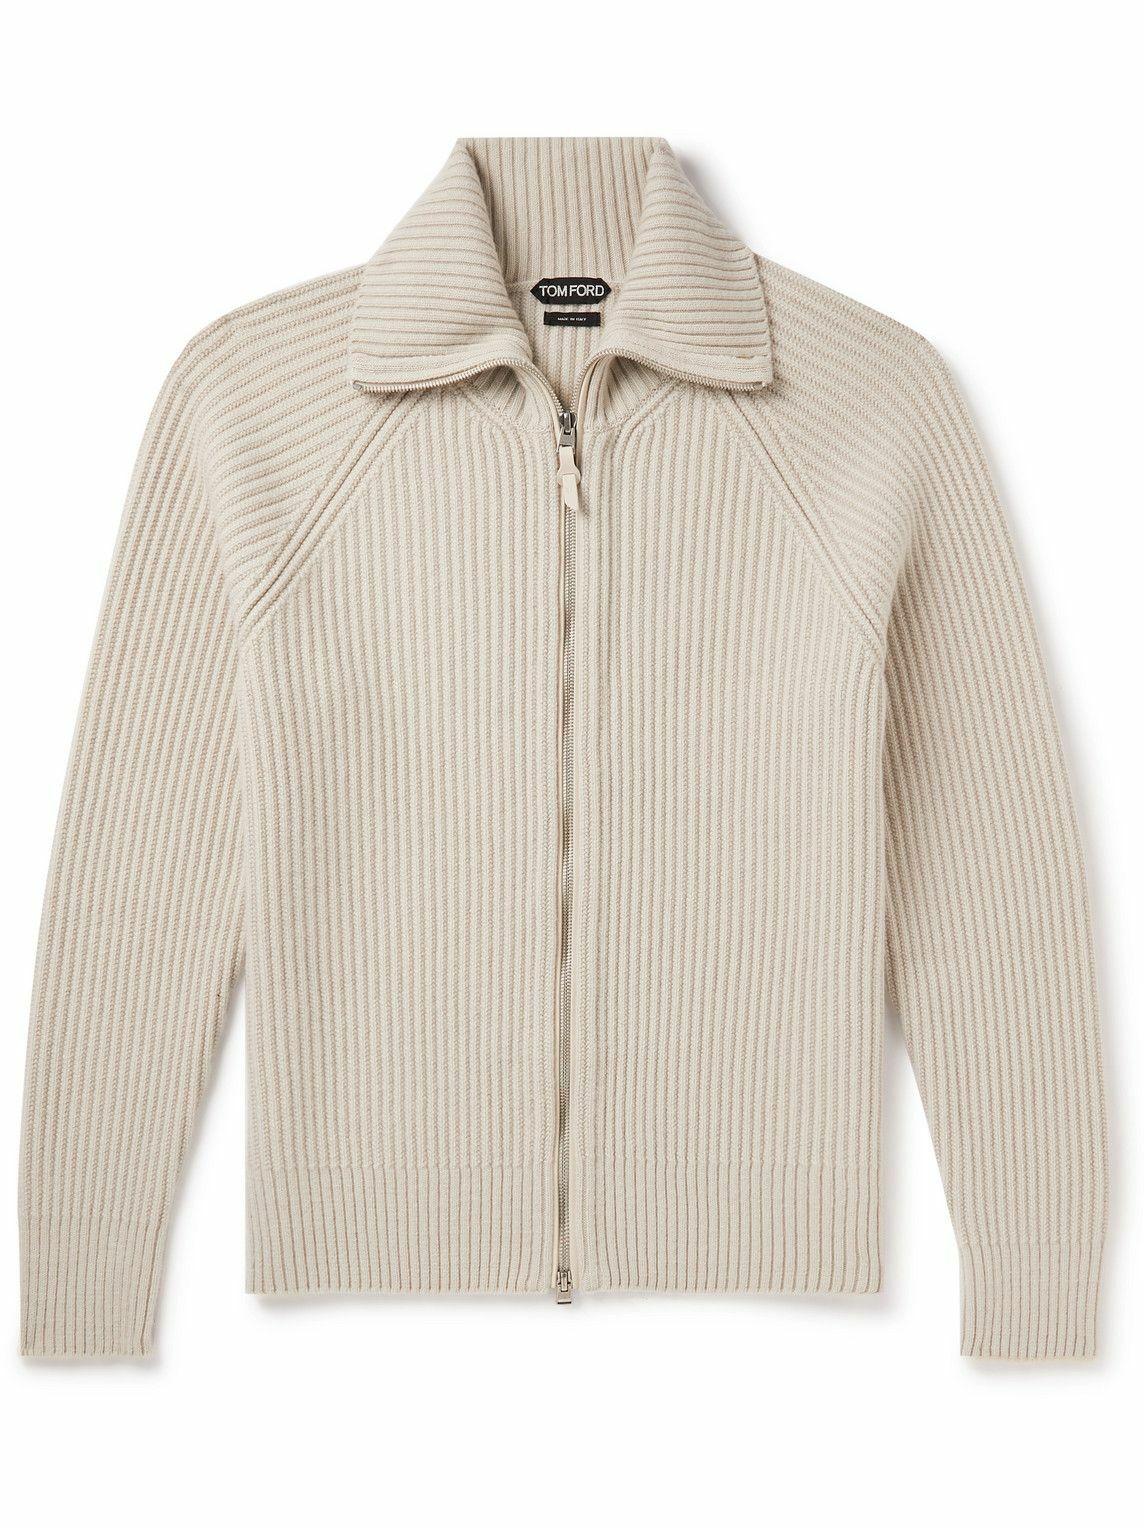 TOM FORD - Ribbed Wool and Cashmere-Blend Zip-Up Cardigan - Gray TOM FORD